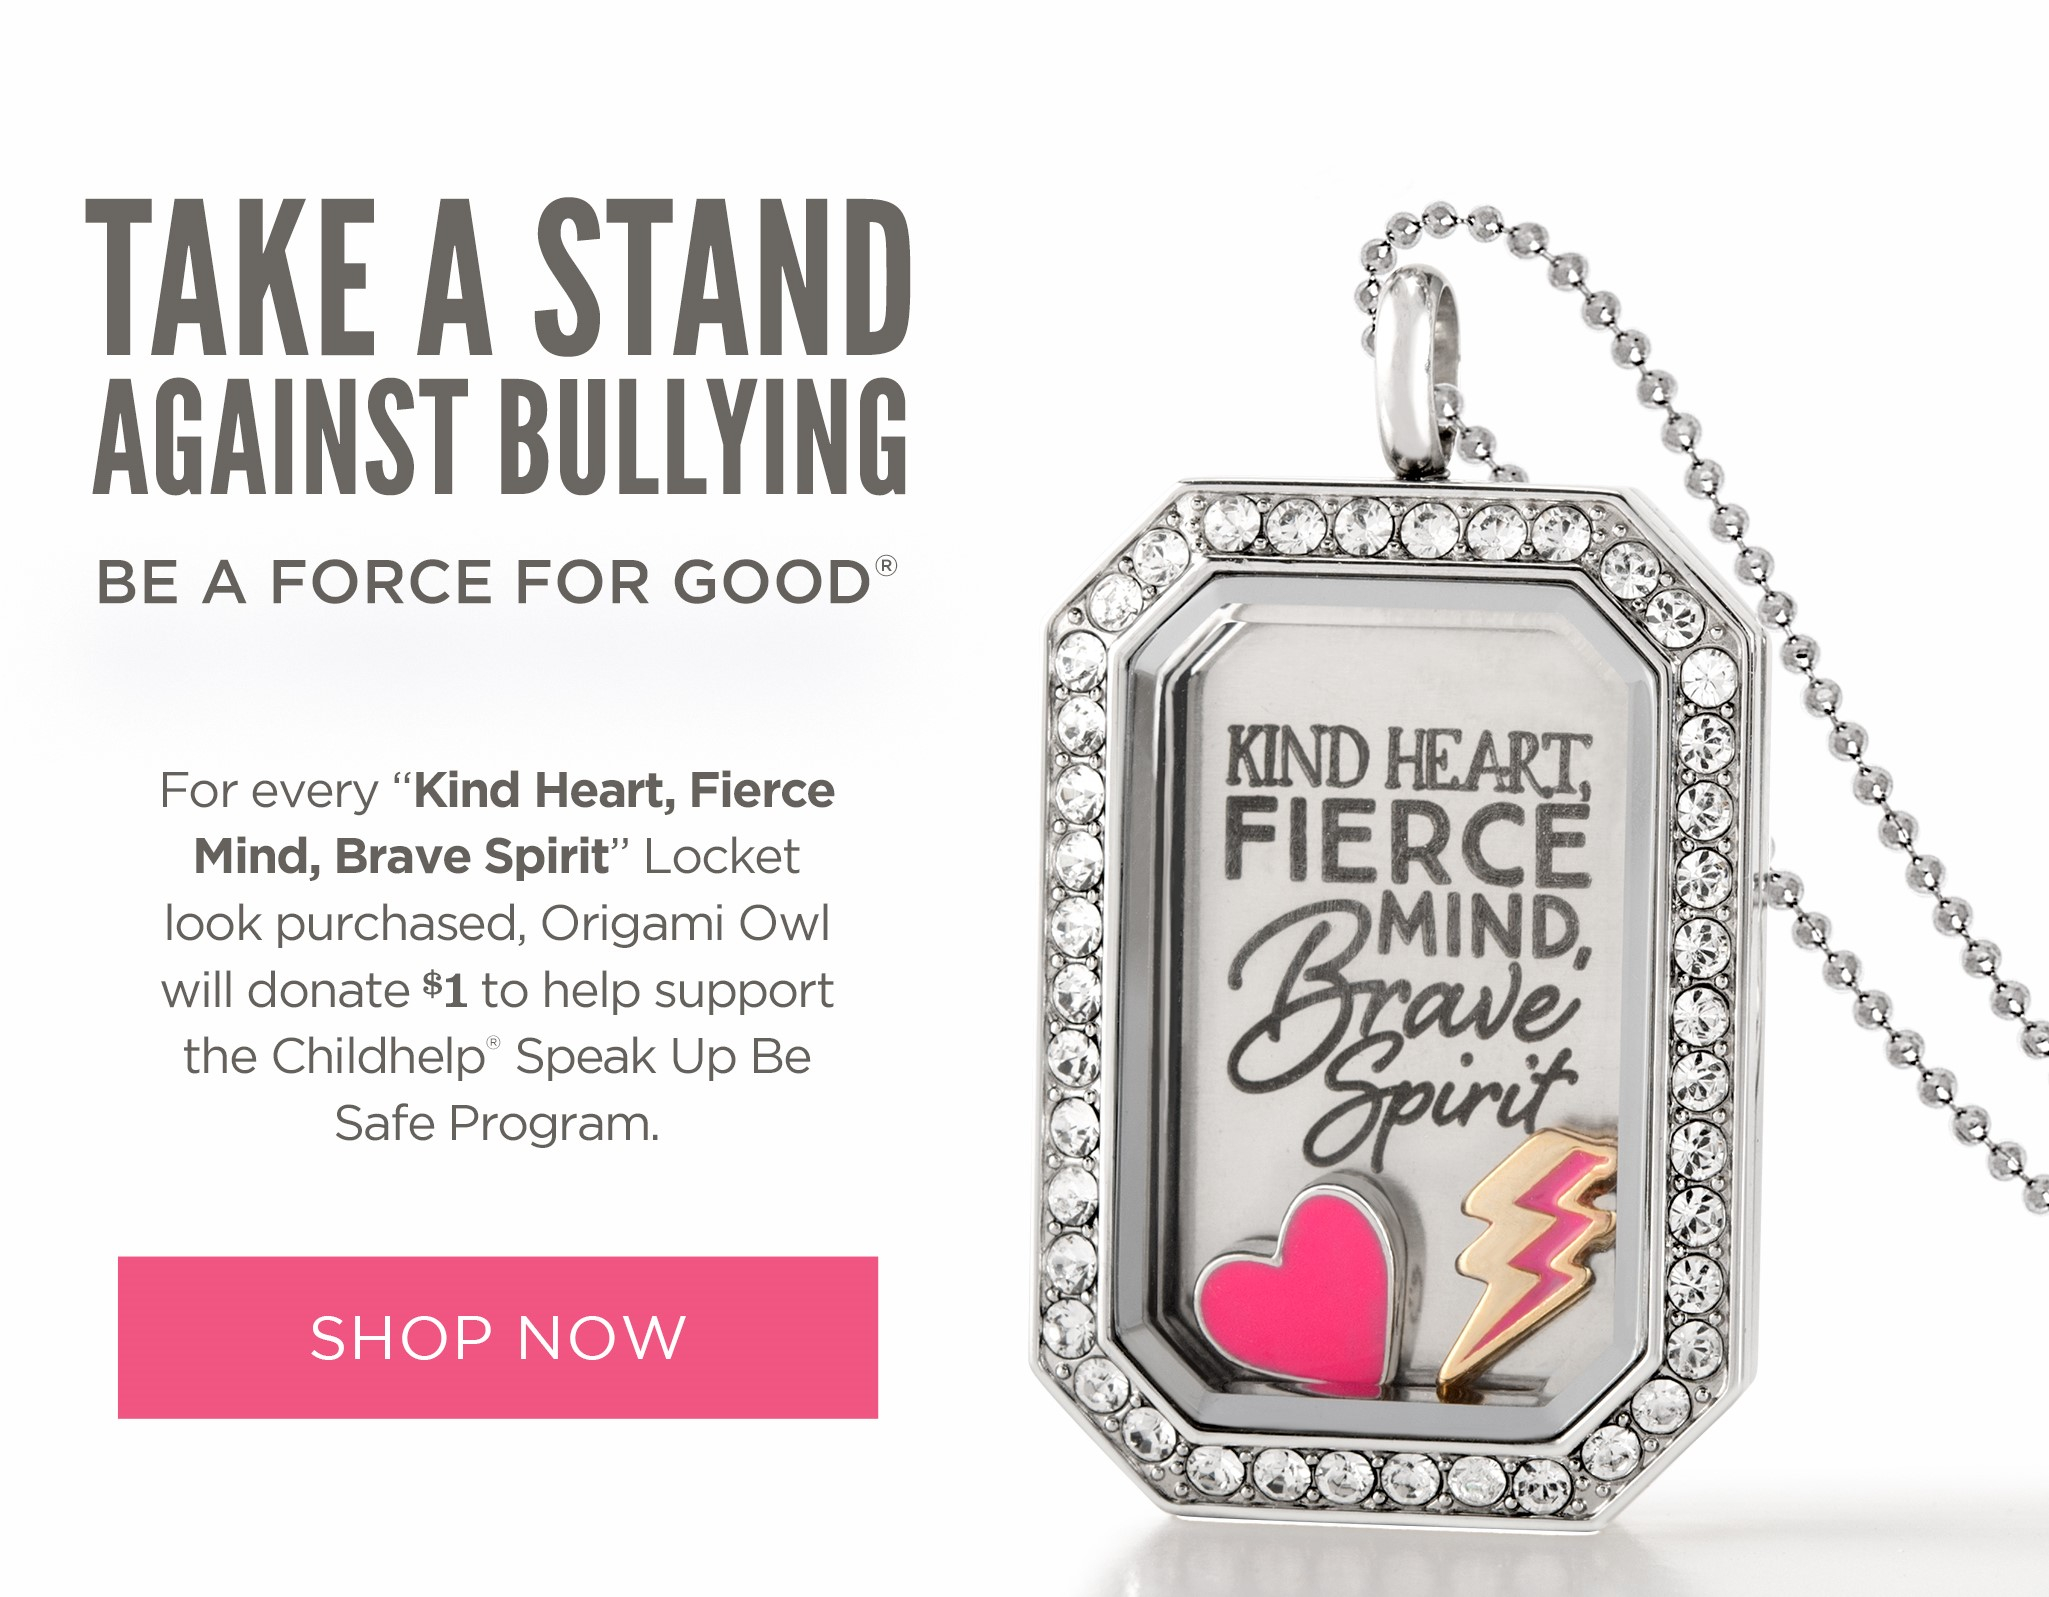 Origami Owl Ball Chain Take A Stand Against Bullying With October Force For Good Look